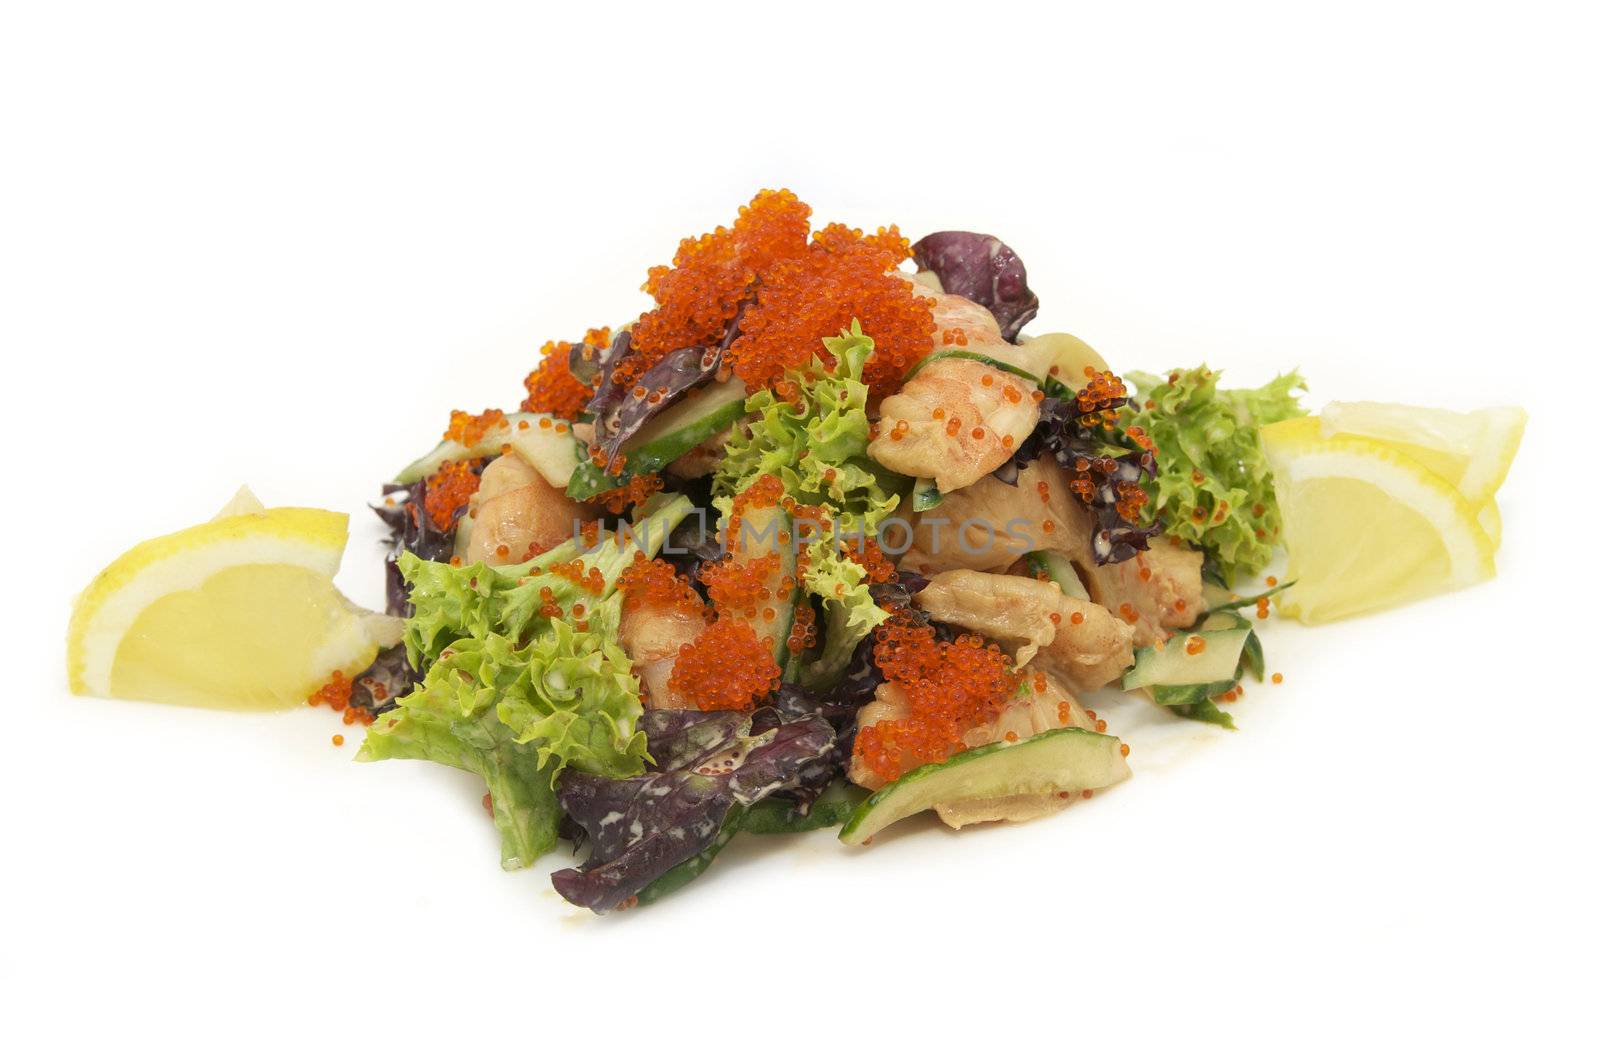 salad with caviar and shrimp on a white background